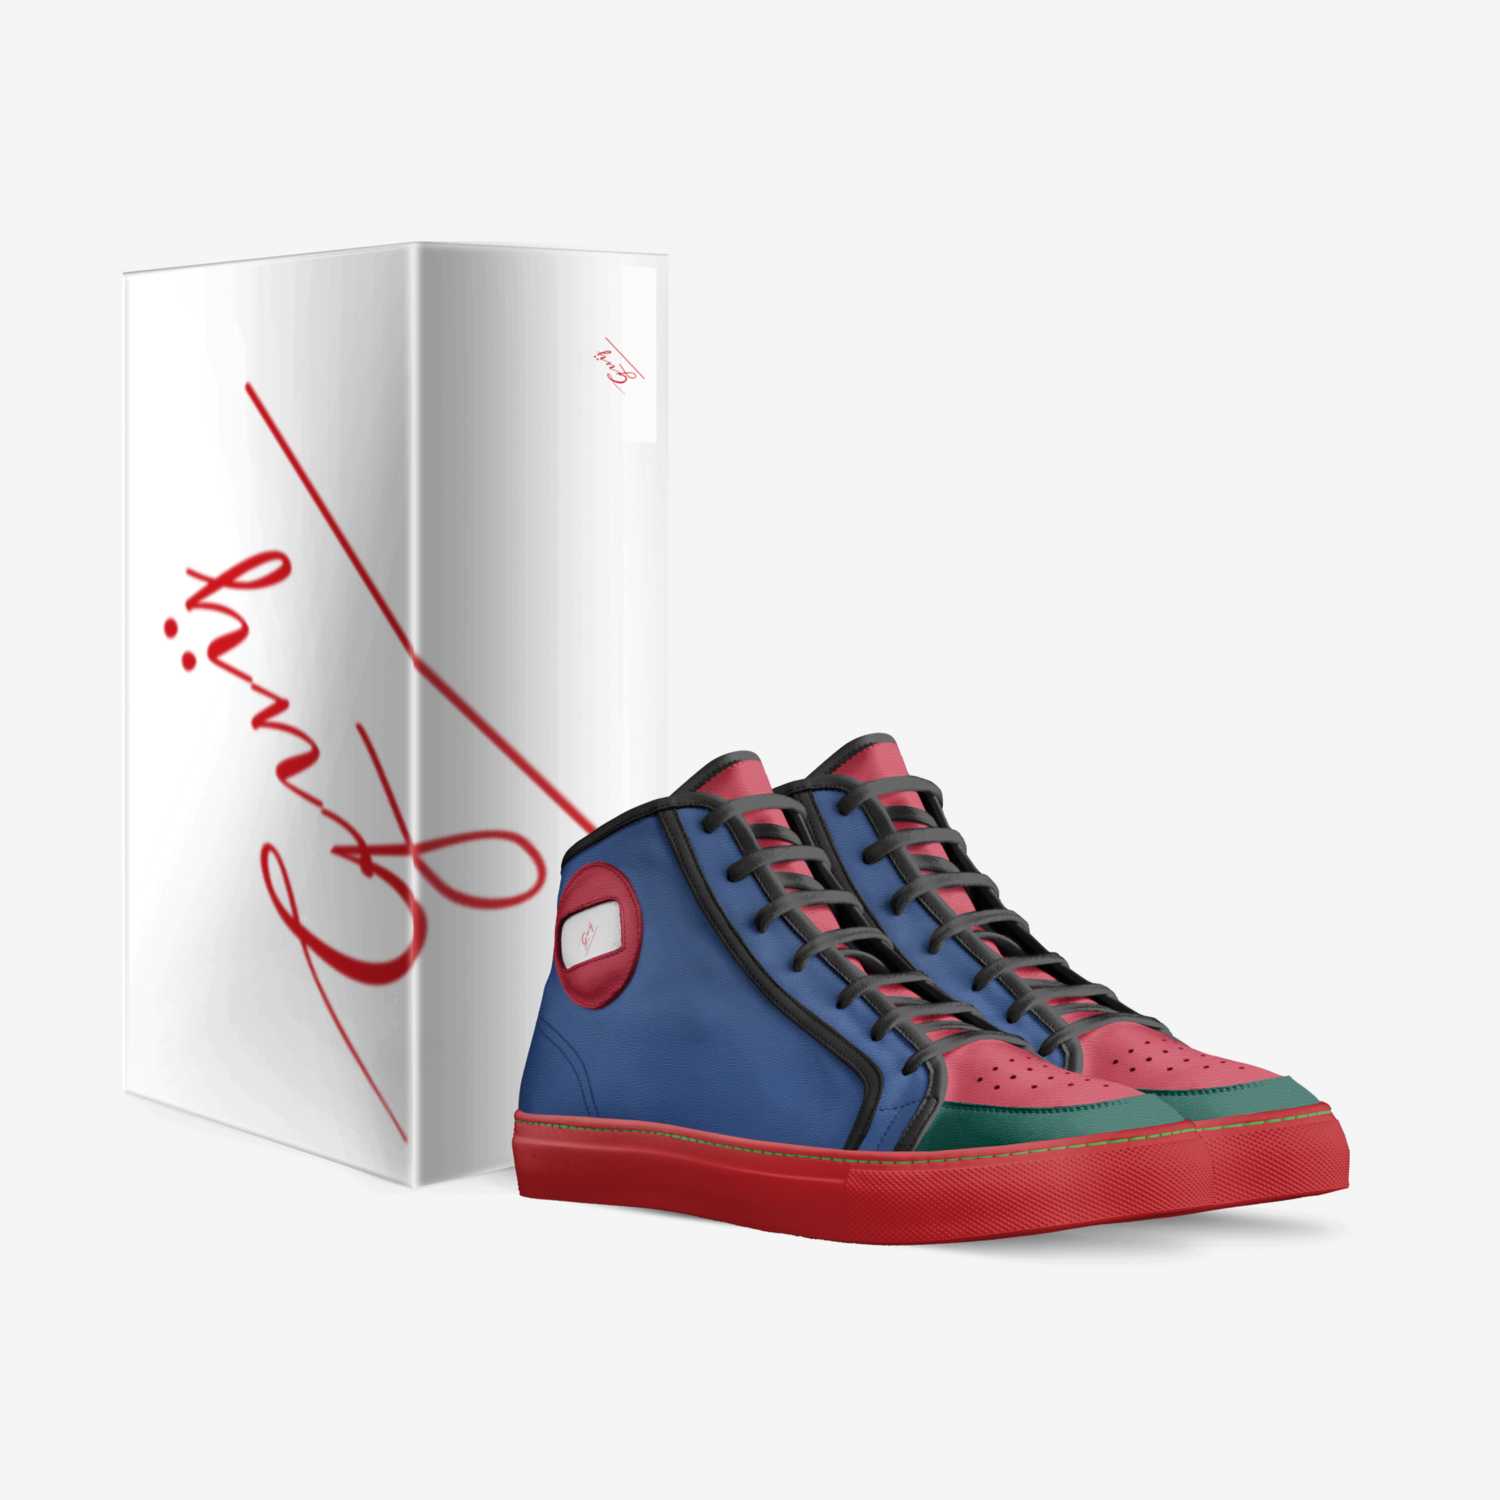  Gliders custom made in Italy shoes by Guÿ | Box view